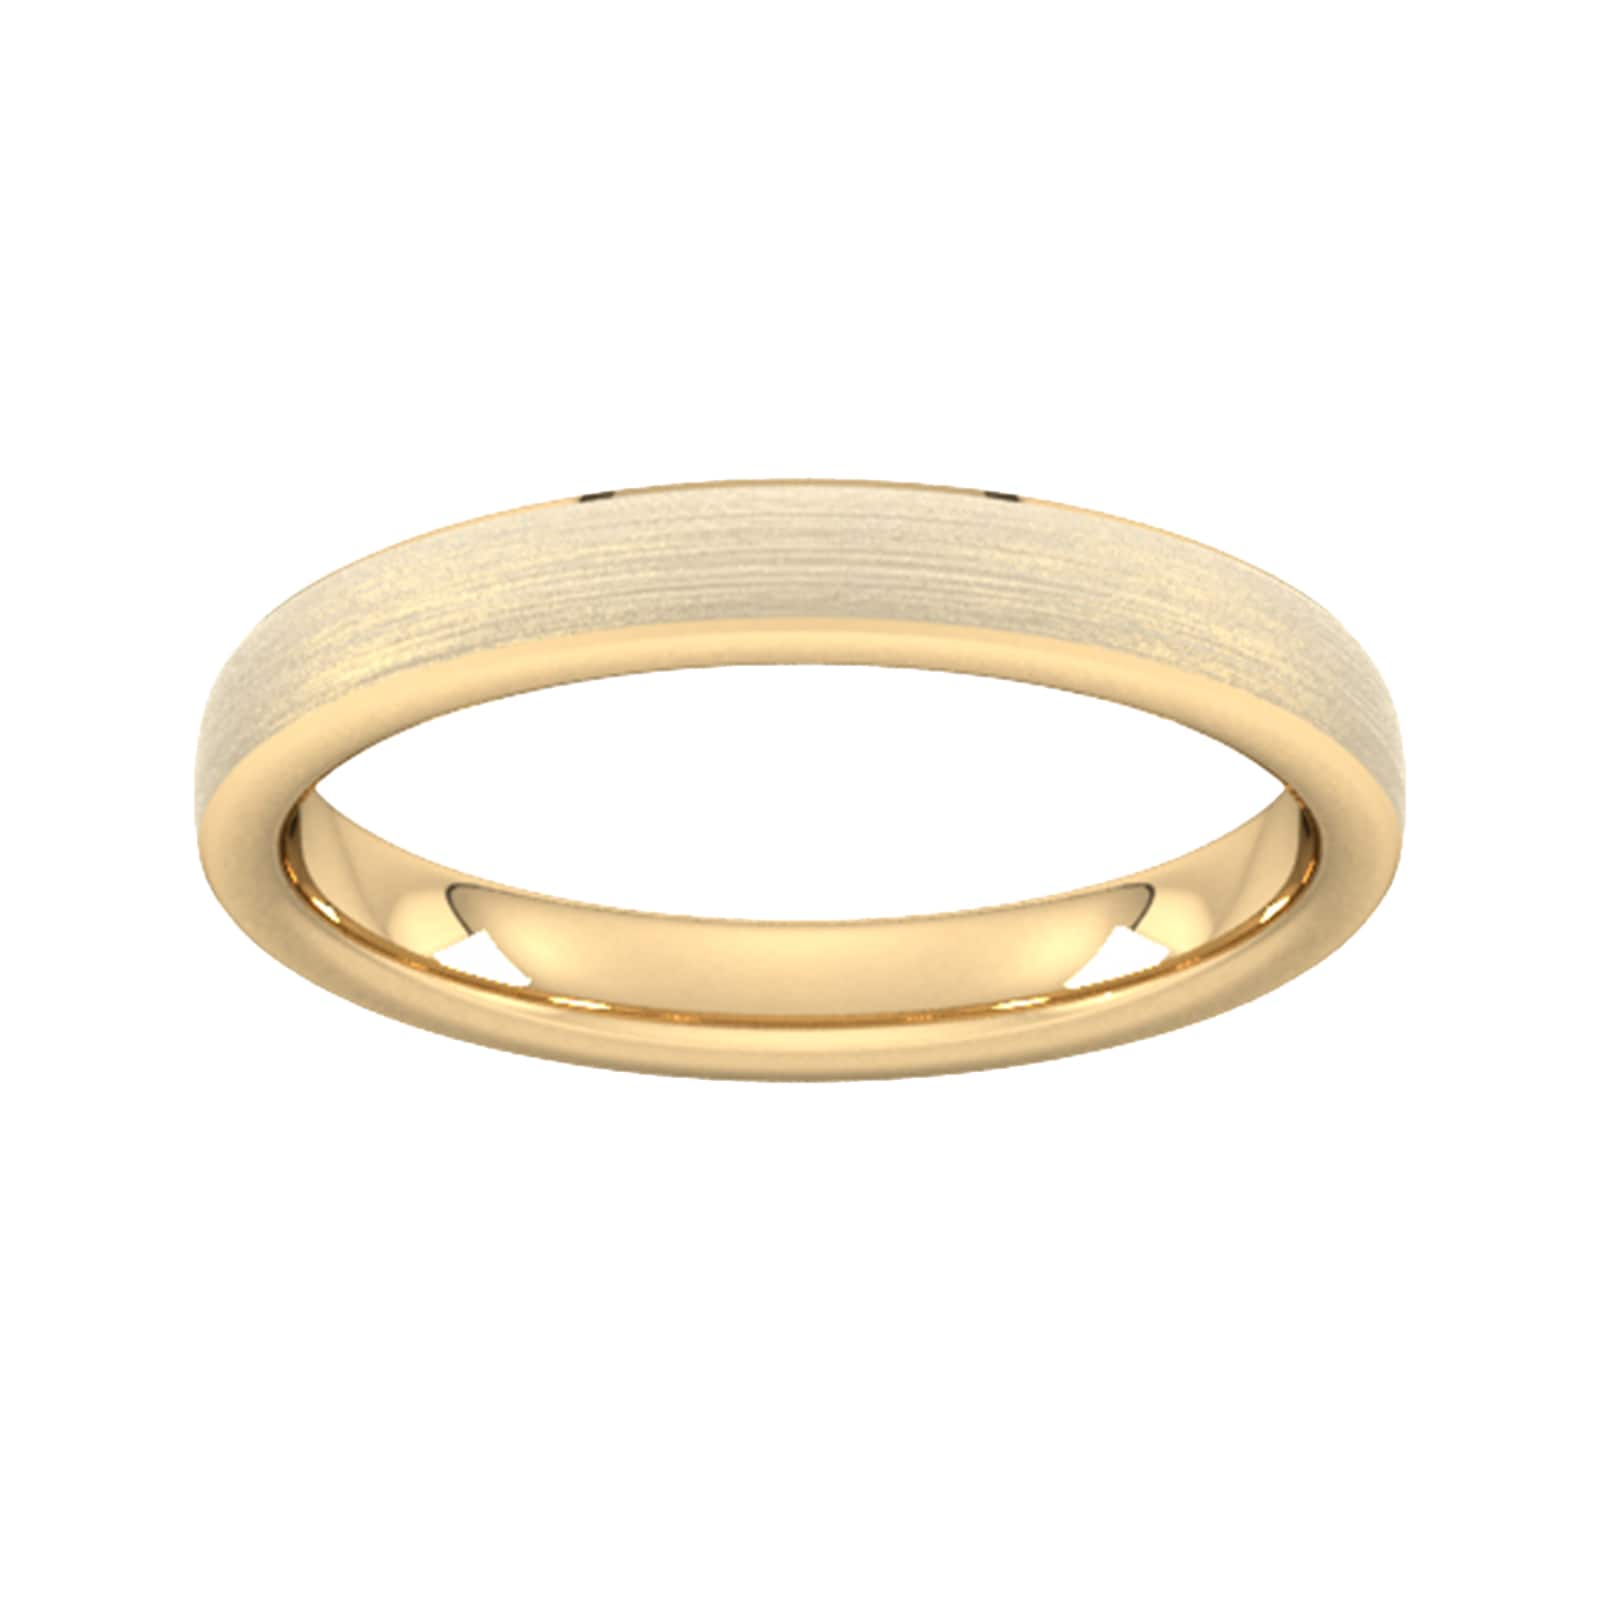 3mm Traditional Court Heavy Polished Chamfered Edges With Matt Centre Wedding Ring In 18 Carat Yellow Gold - Ring Size T